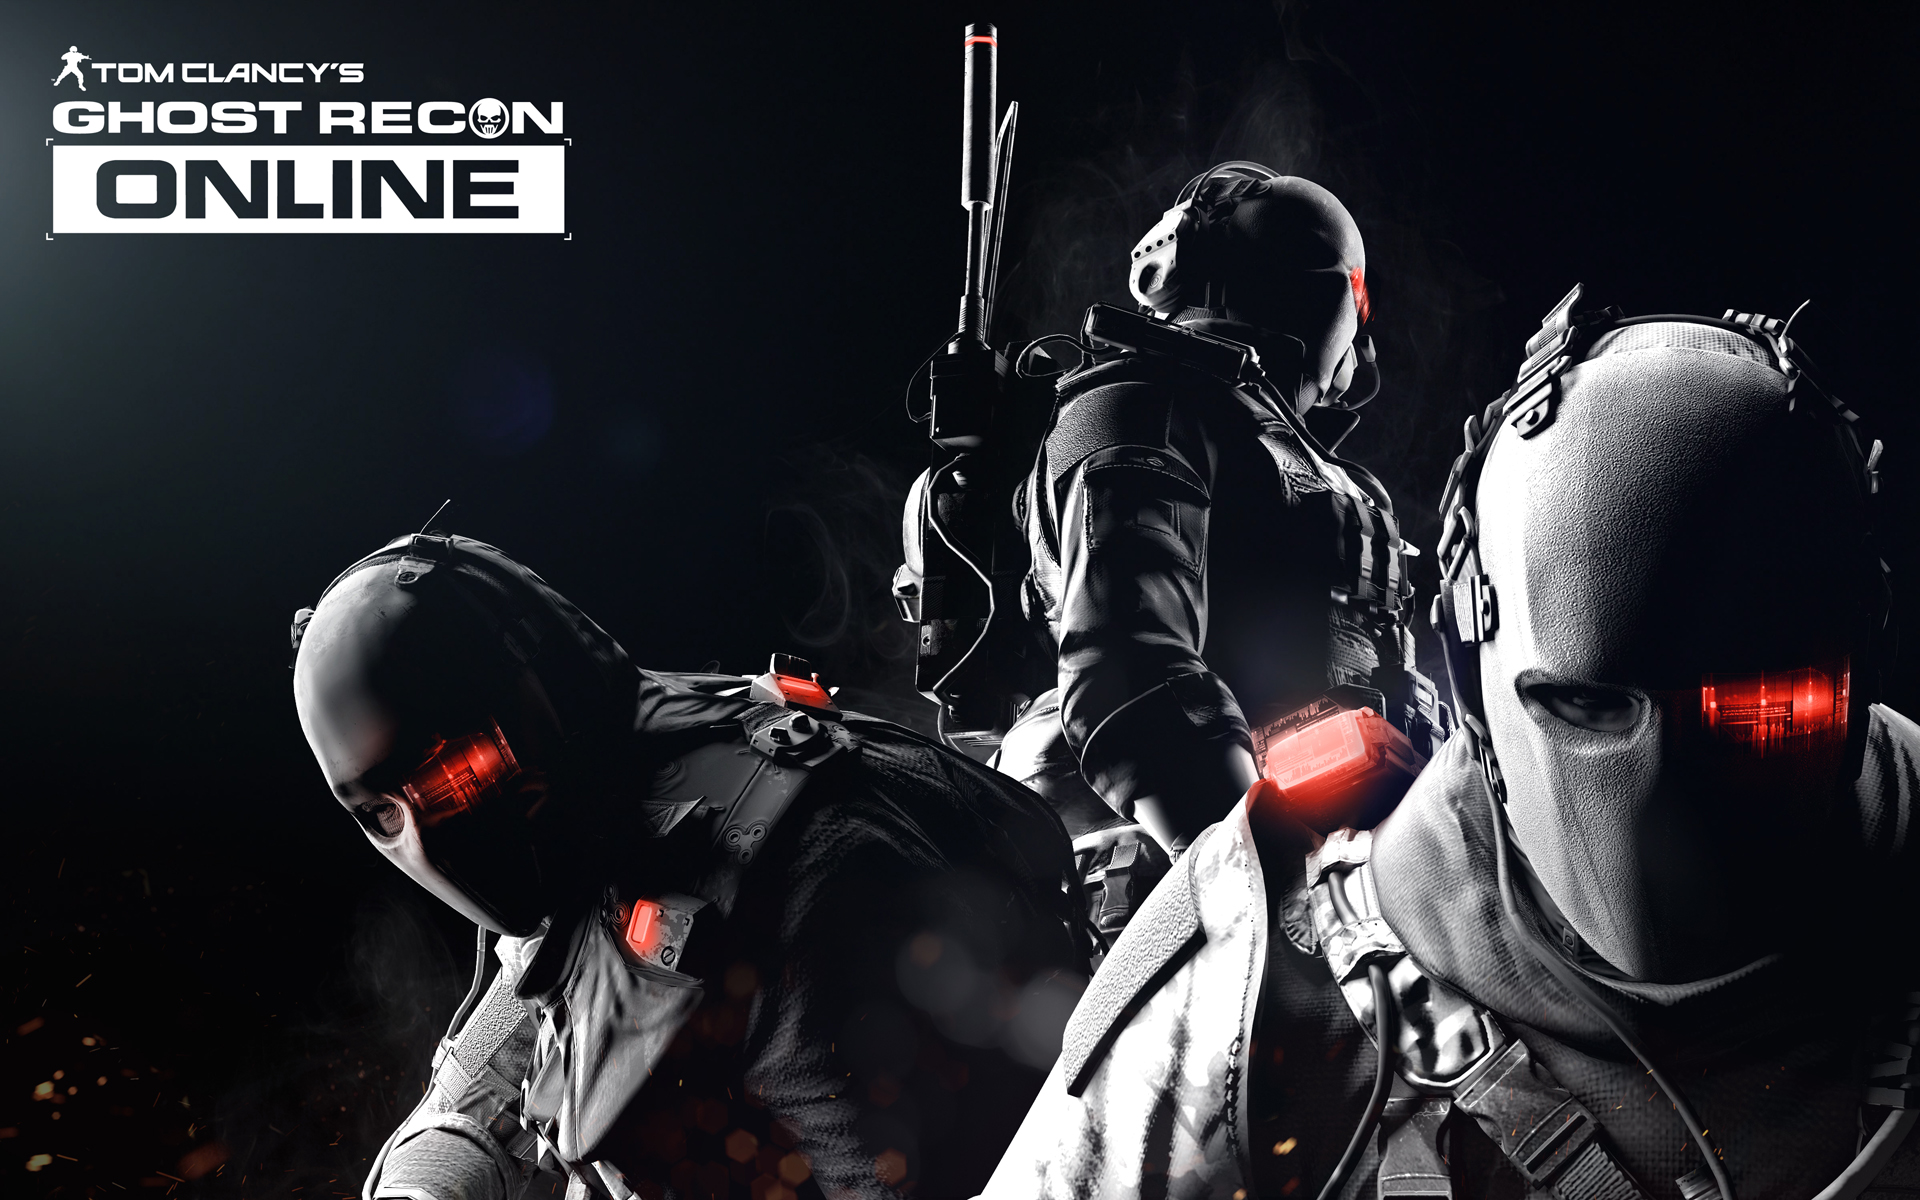 recon ghost online clancys tom wallpaper wallpapers walls